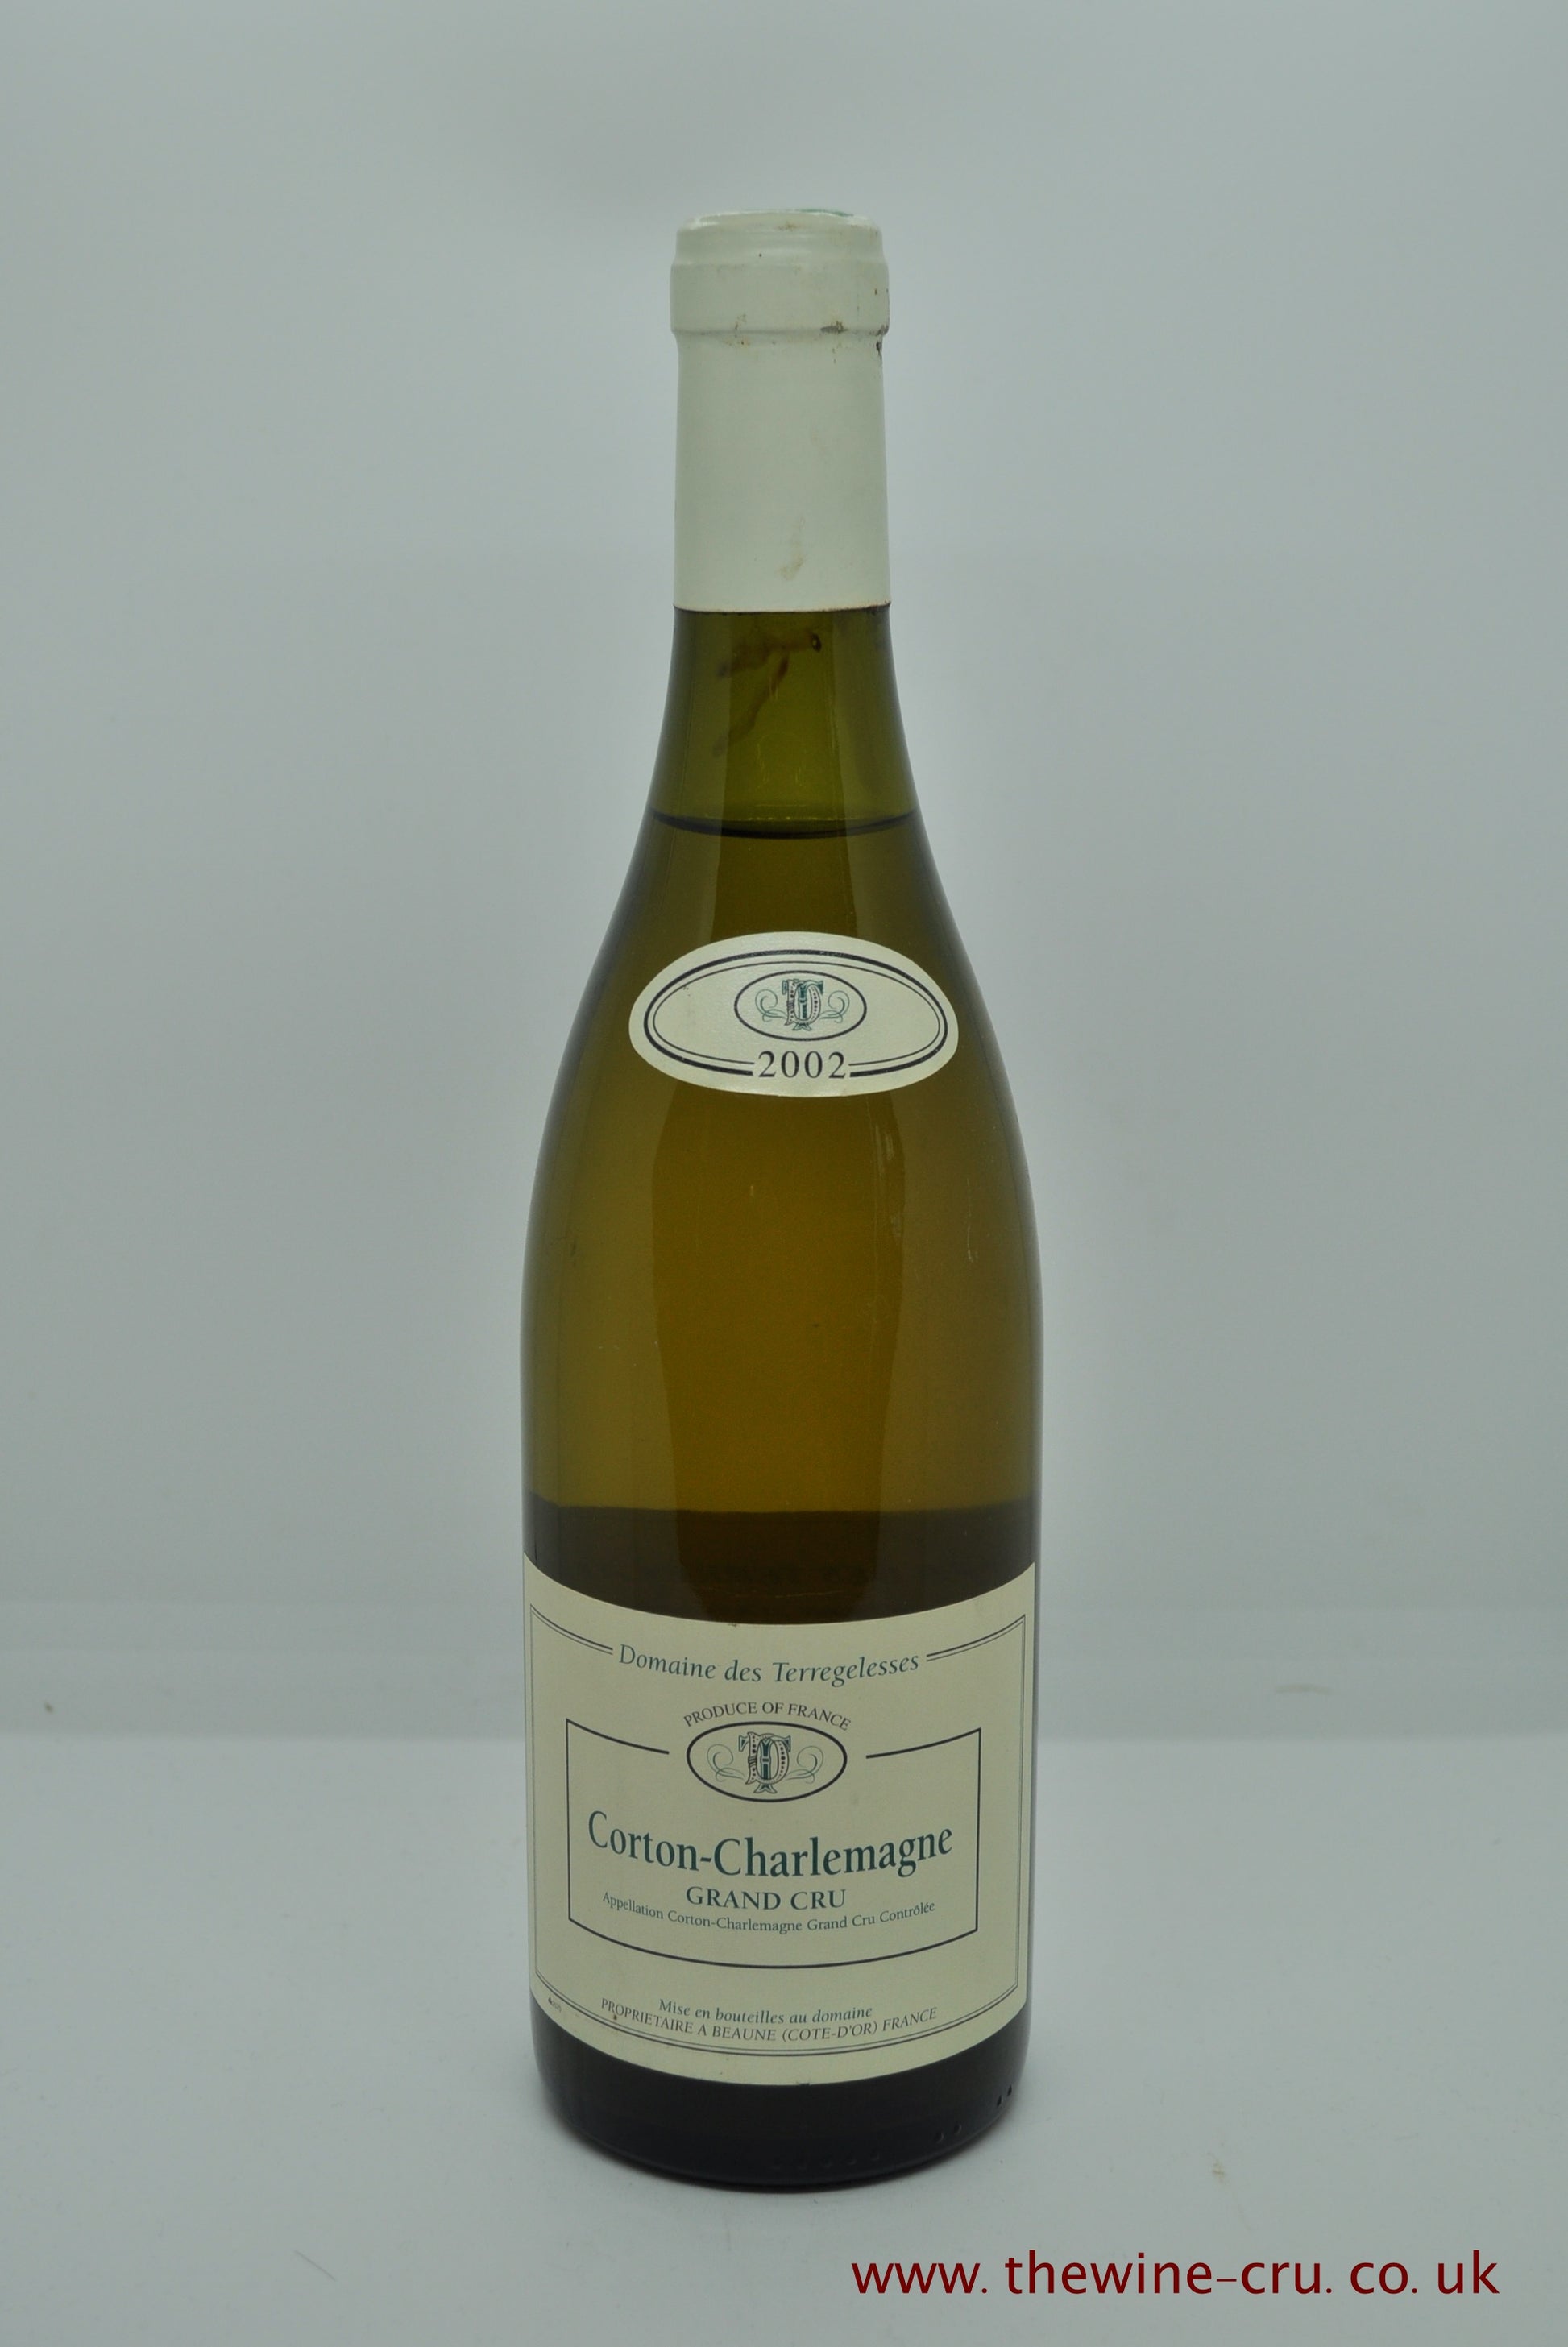 2002 vintage white wine. Domaine des Terregelesses Corton Charlemagne Grand Cru 2002. France Burgundy.  The bottle is in good condition with the level being  3cm below base of cork. Immediate delivery. free local delivery. Gift wrapping available.